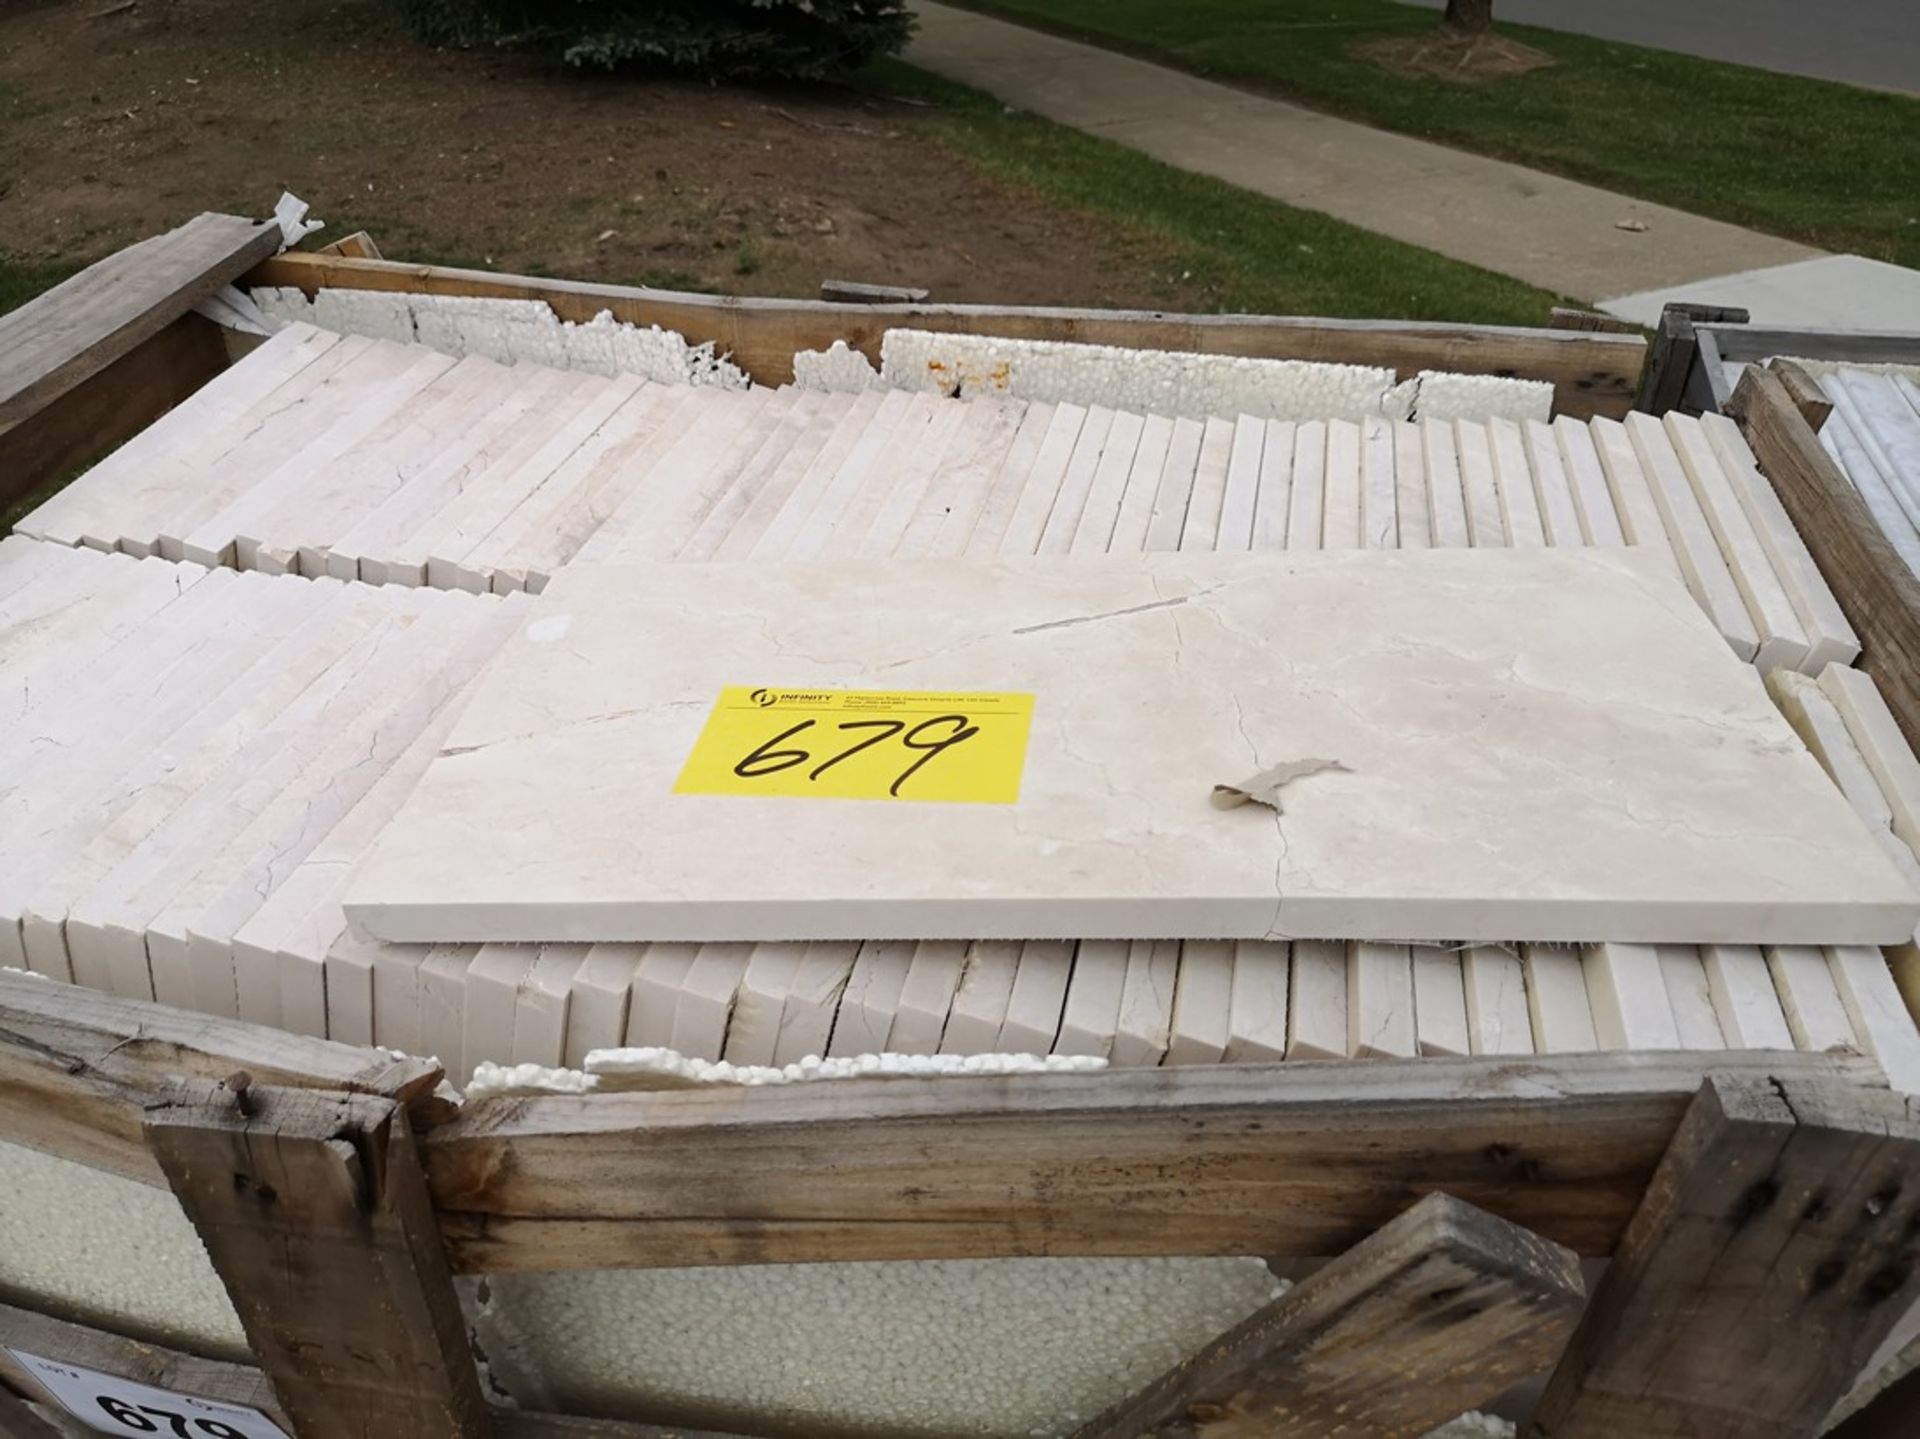 SKID MARBLE NATURAL STONE 12" X 24" (2 SKIDS) - Image 2 of 3